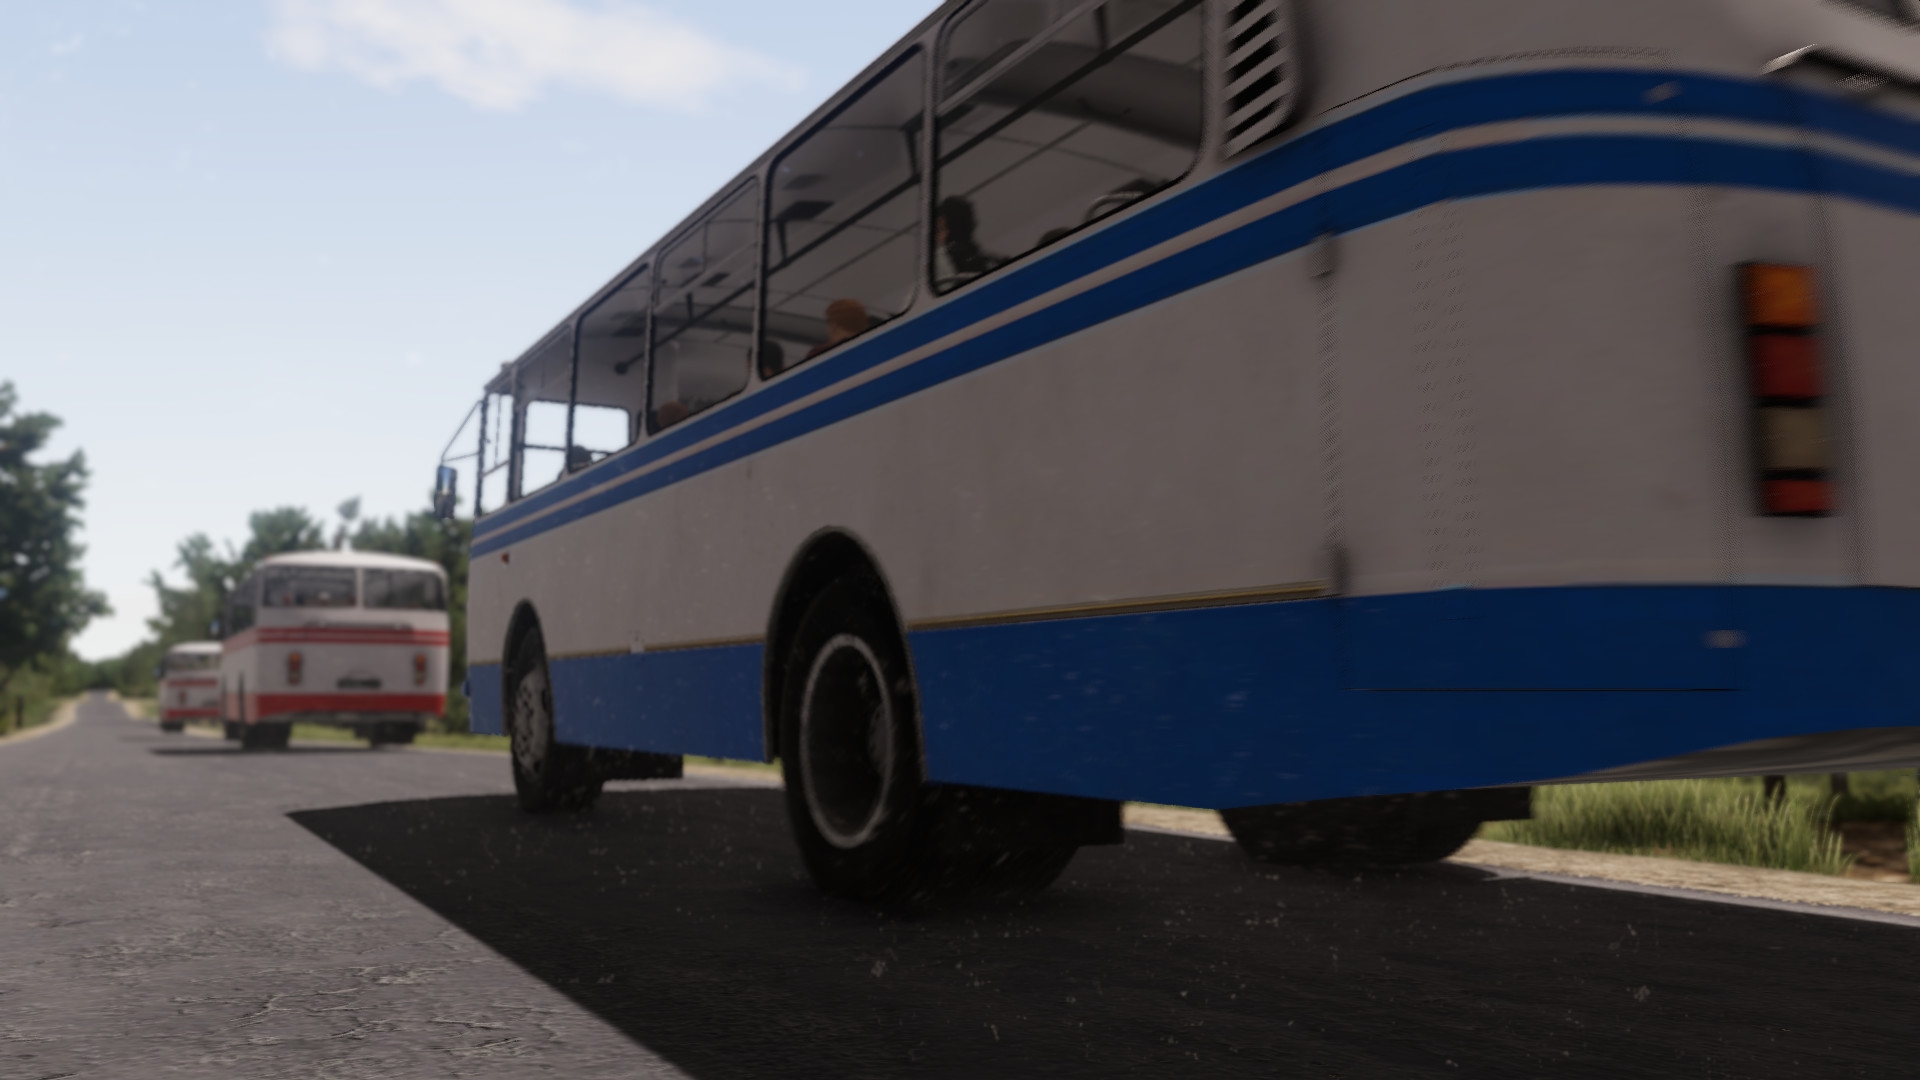 Bus World Combines Travel With Rescue And Enters Early Access Sometime This Year